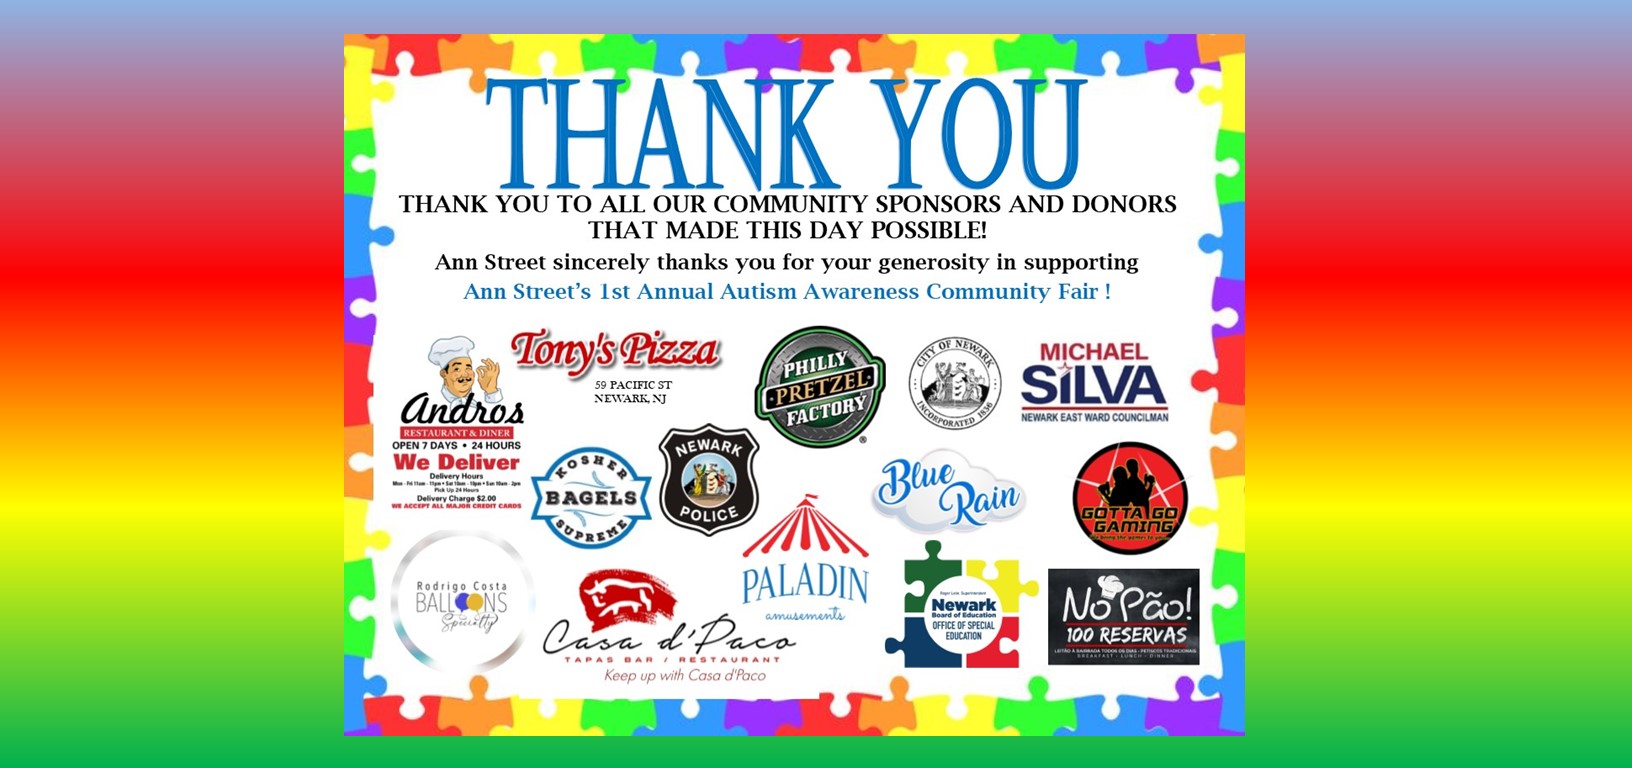 Thank you. Thank you to all our community Sponsors and Donors that made this day possible! Ann Street sincerely thanks you for your generosity in supporting Ann Street's 1st Annual Autism Awareness Community Fair!